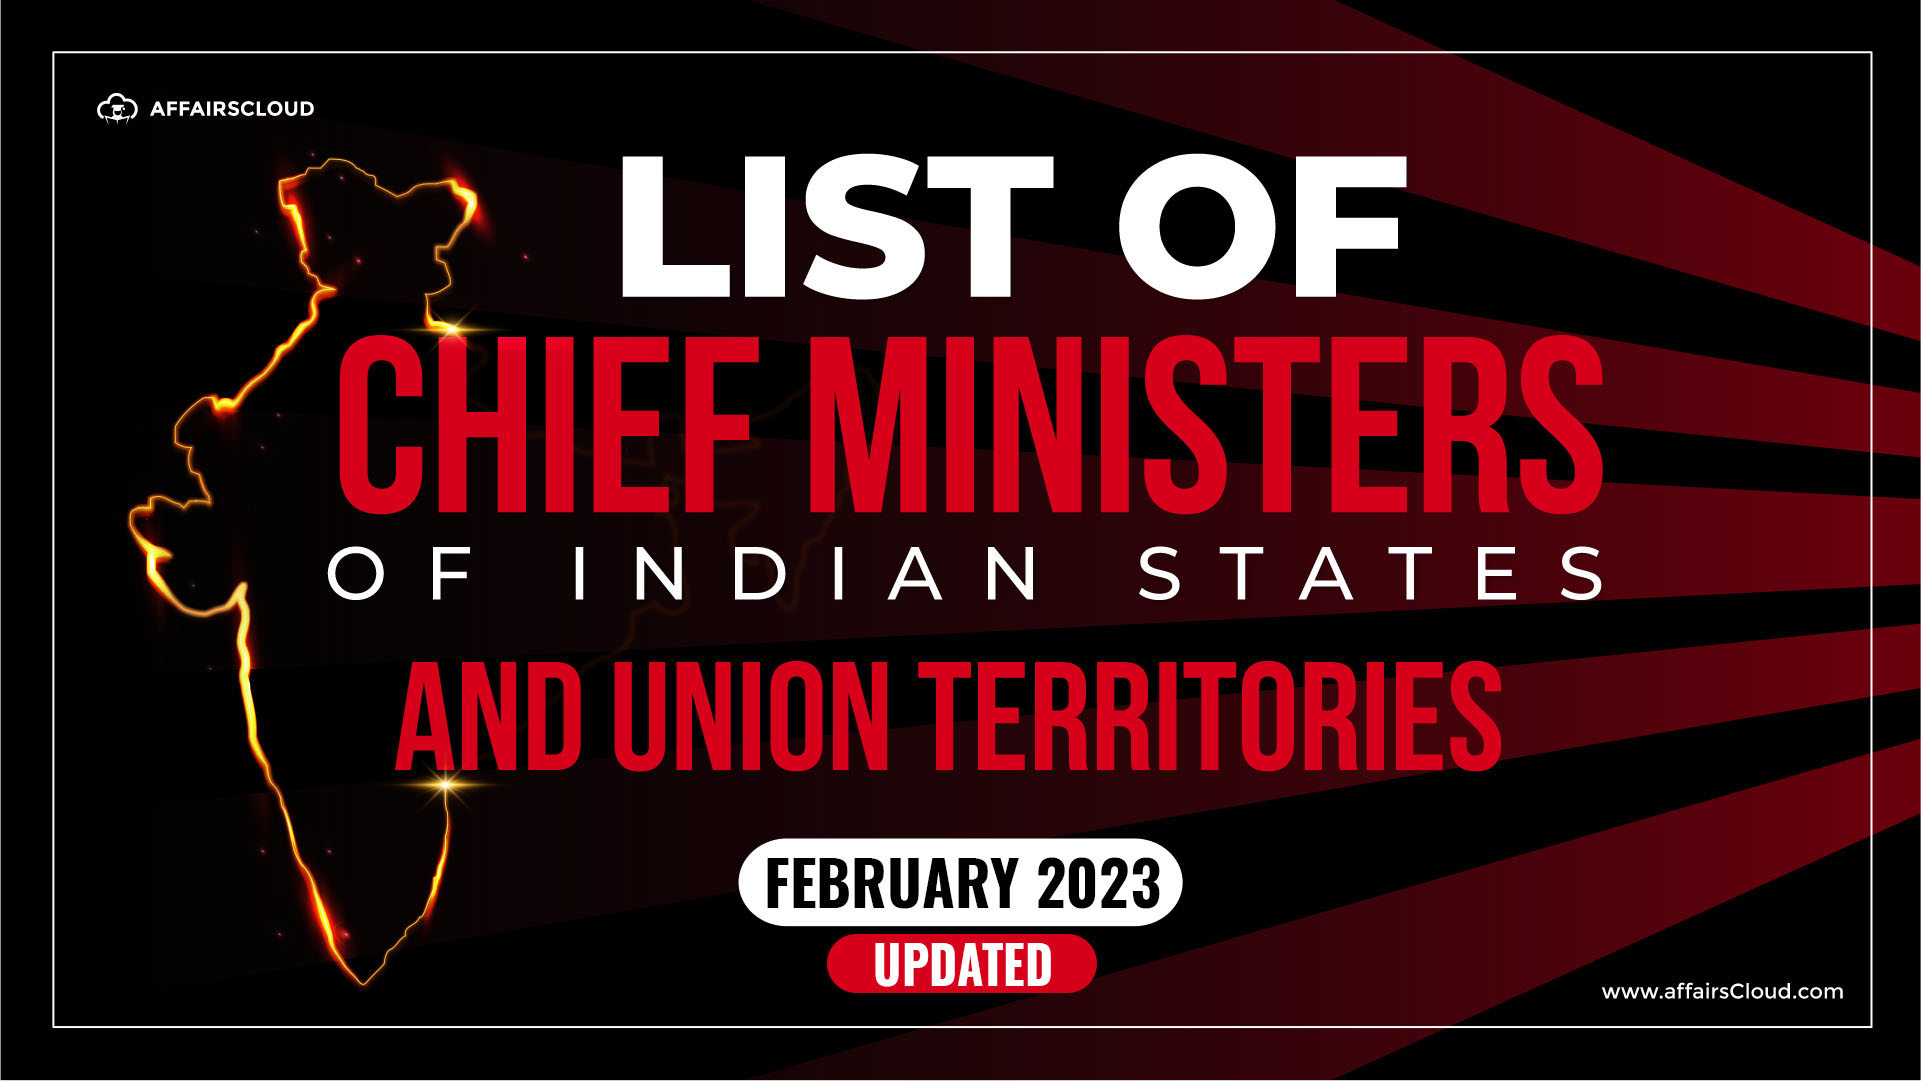 List of chief ministers February 2023